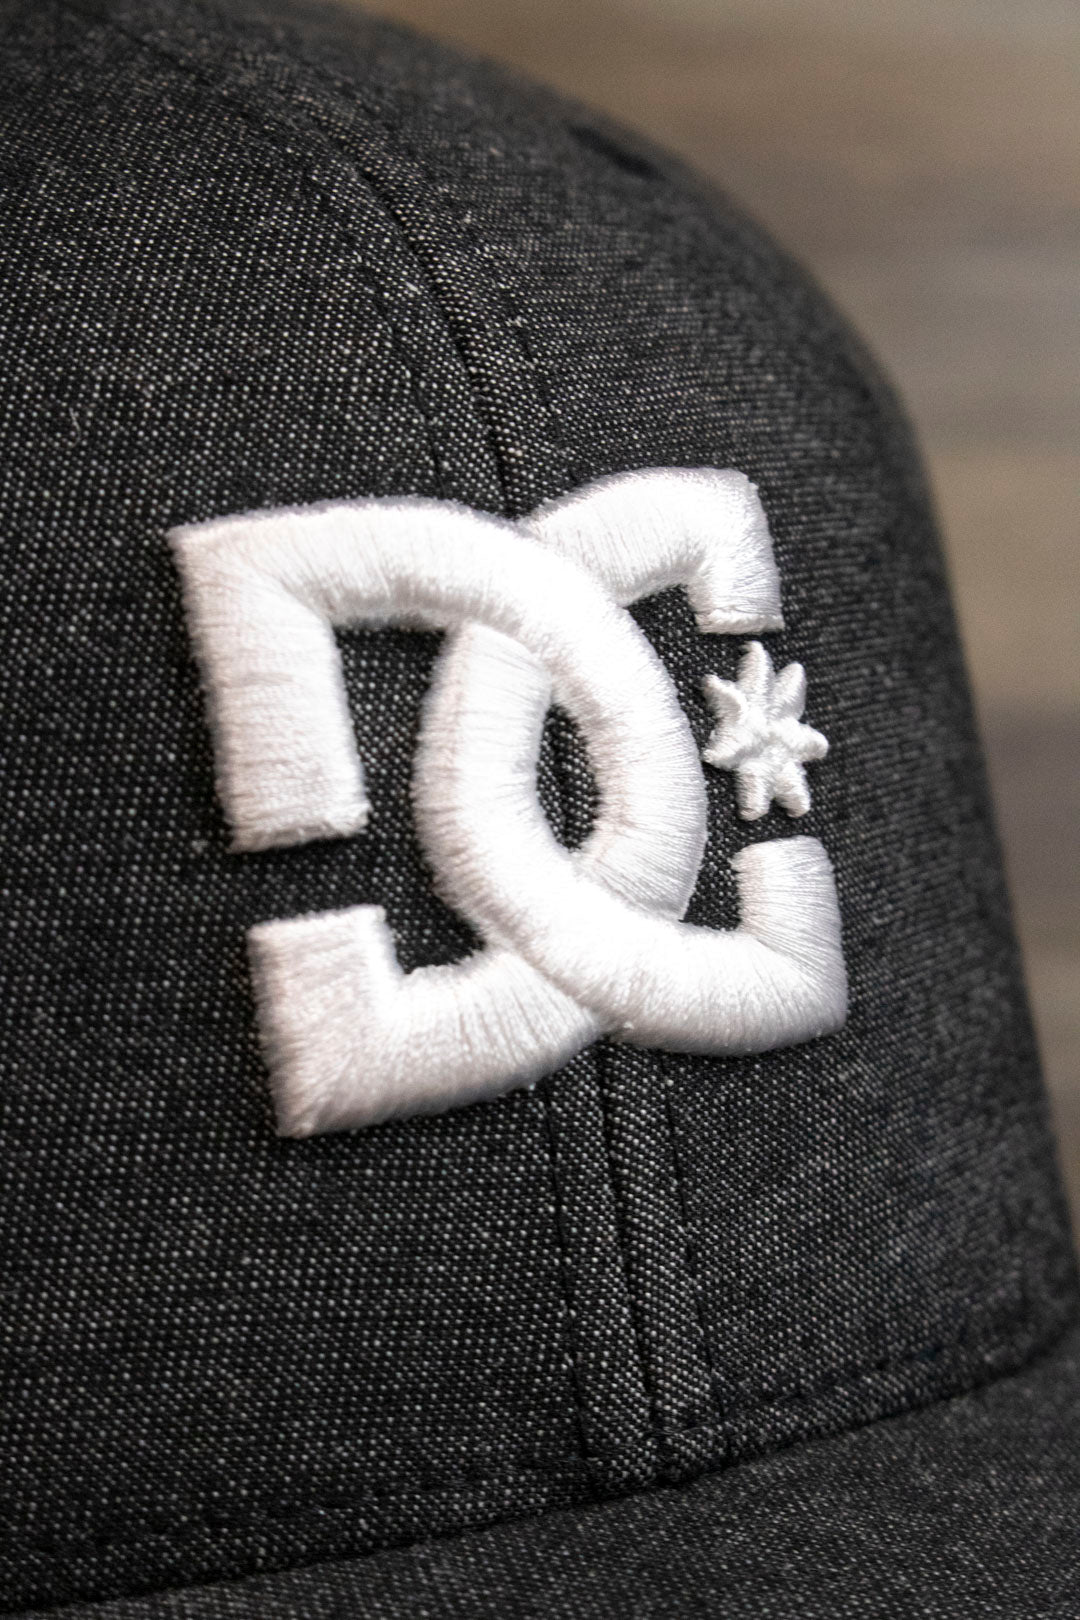 the DC logo on the Dark Gray Bentbrim Skater Hat | DC Shoes Black Bottom Heather Gray Flexfit Cap is made of white puff embroidery